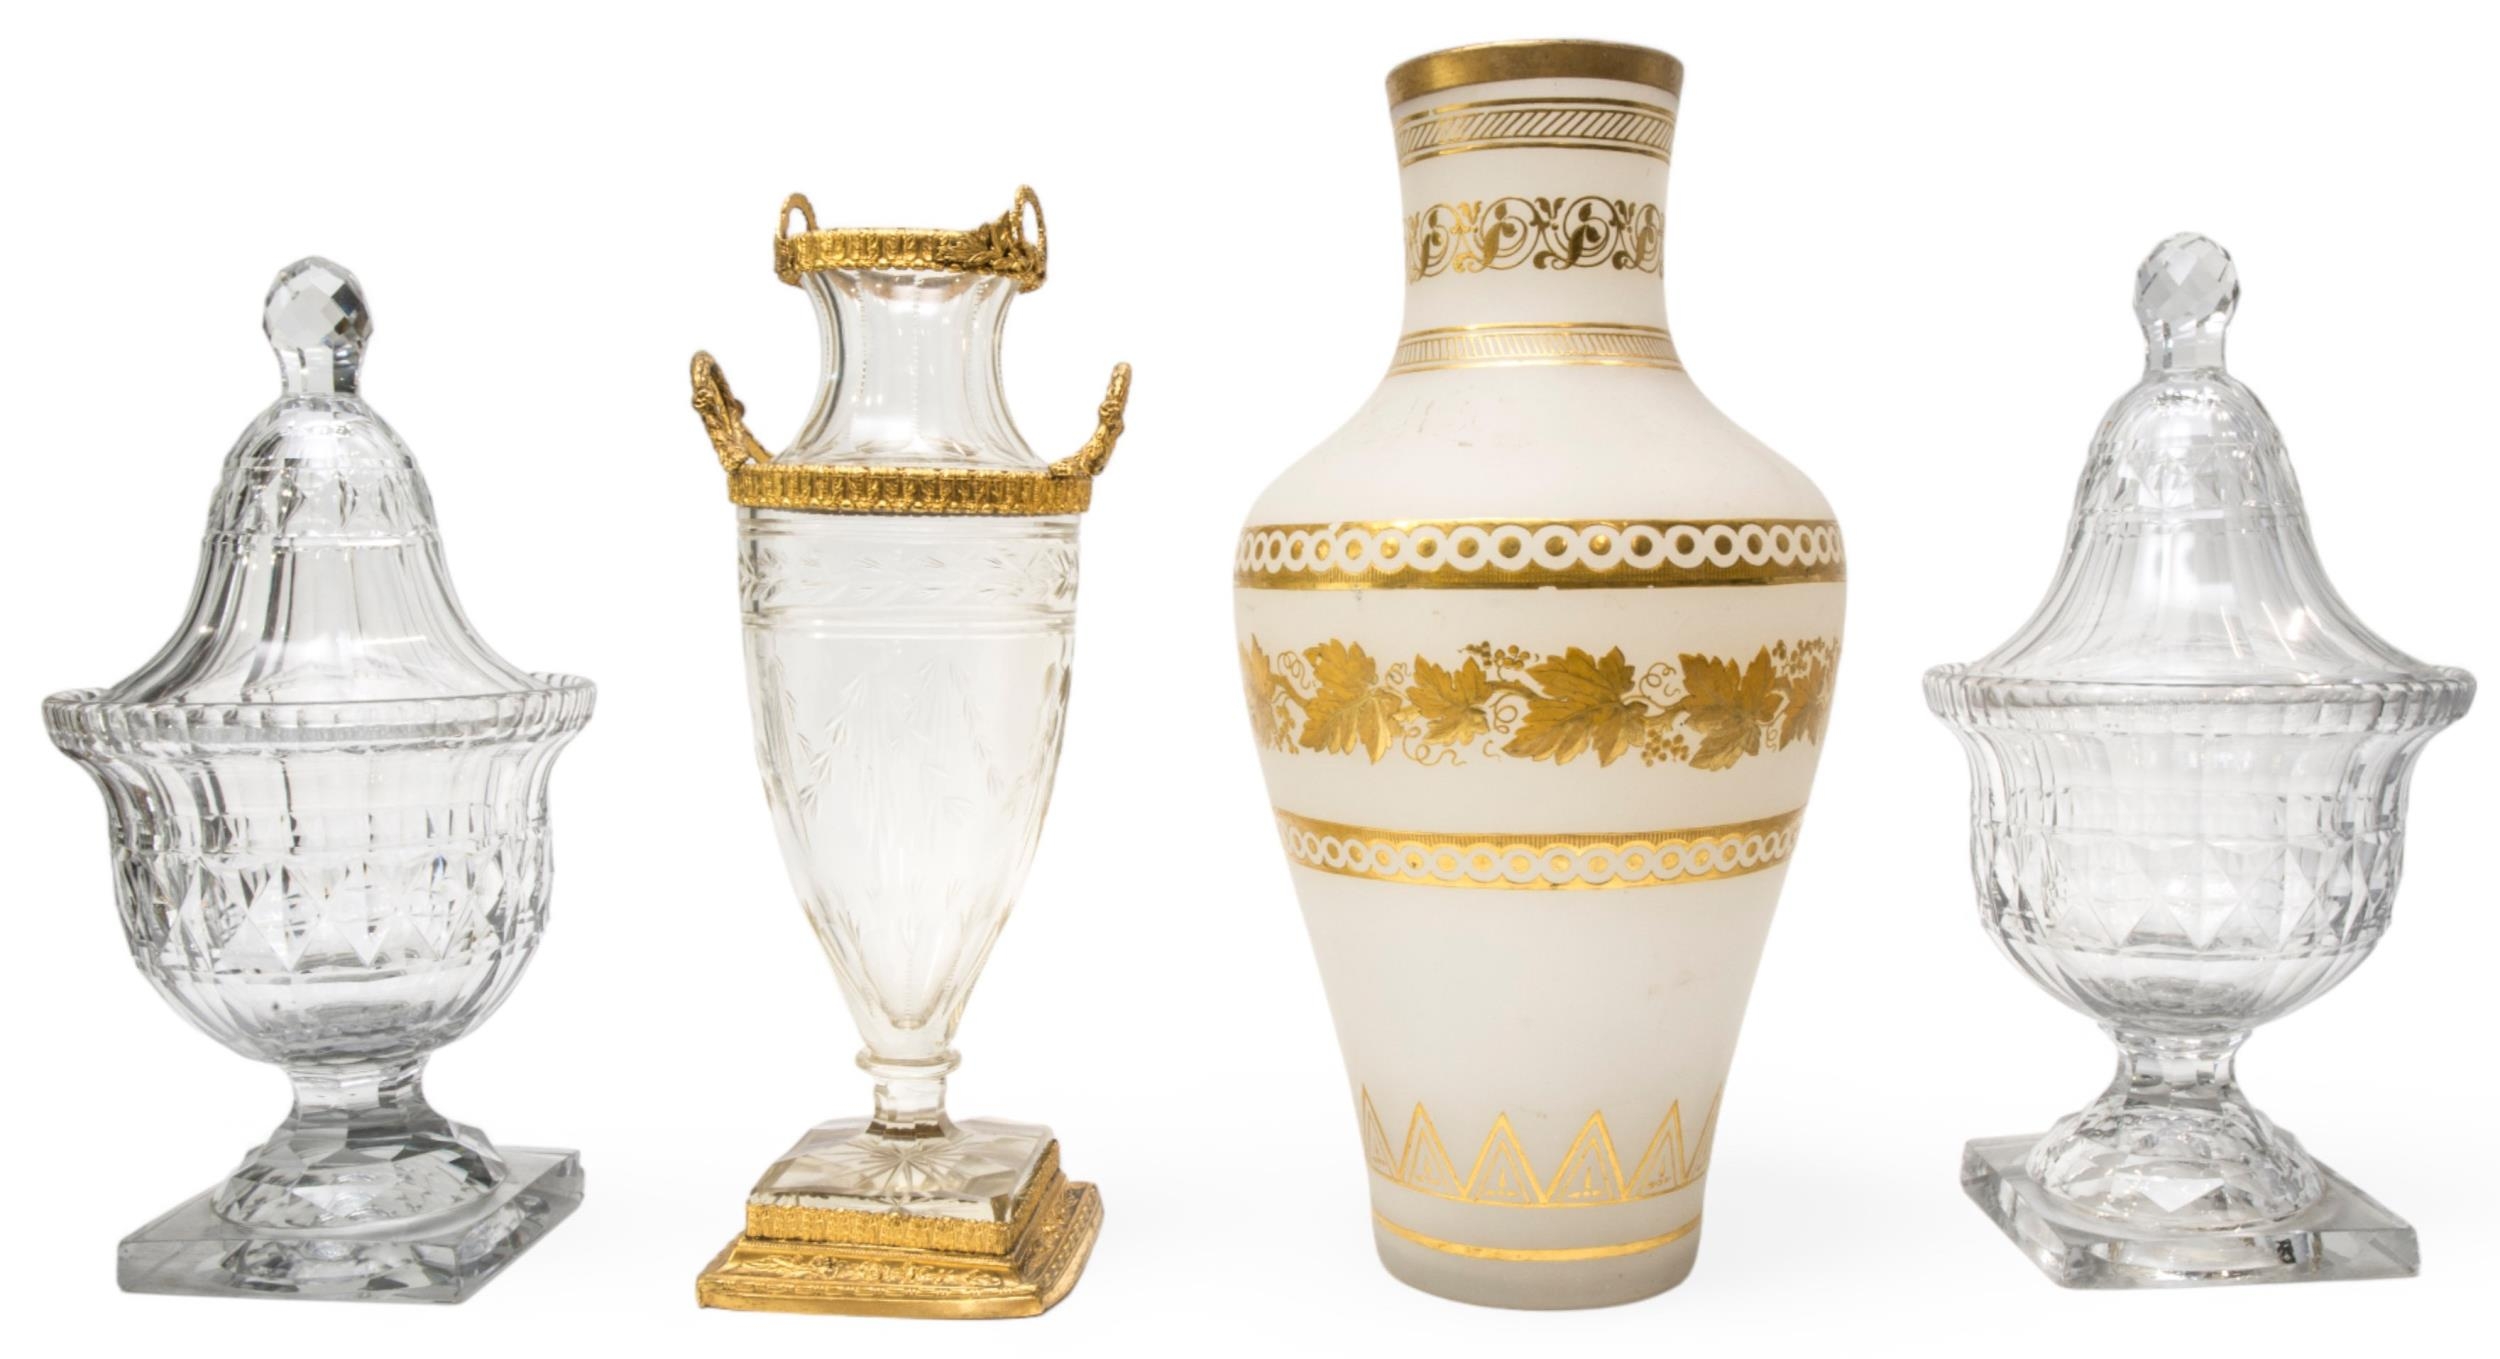 A 19TH CENTURY AMPHORA FORM GLASS VASE, with gilt metal mounts, the sides cut with laurel leaf